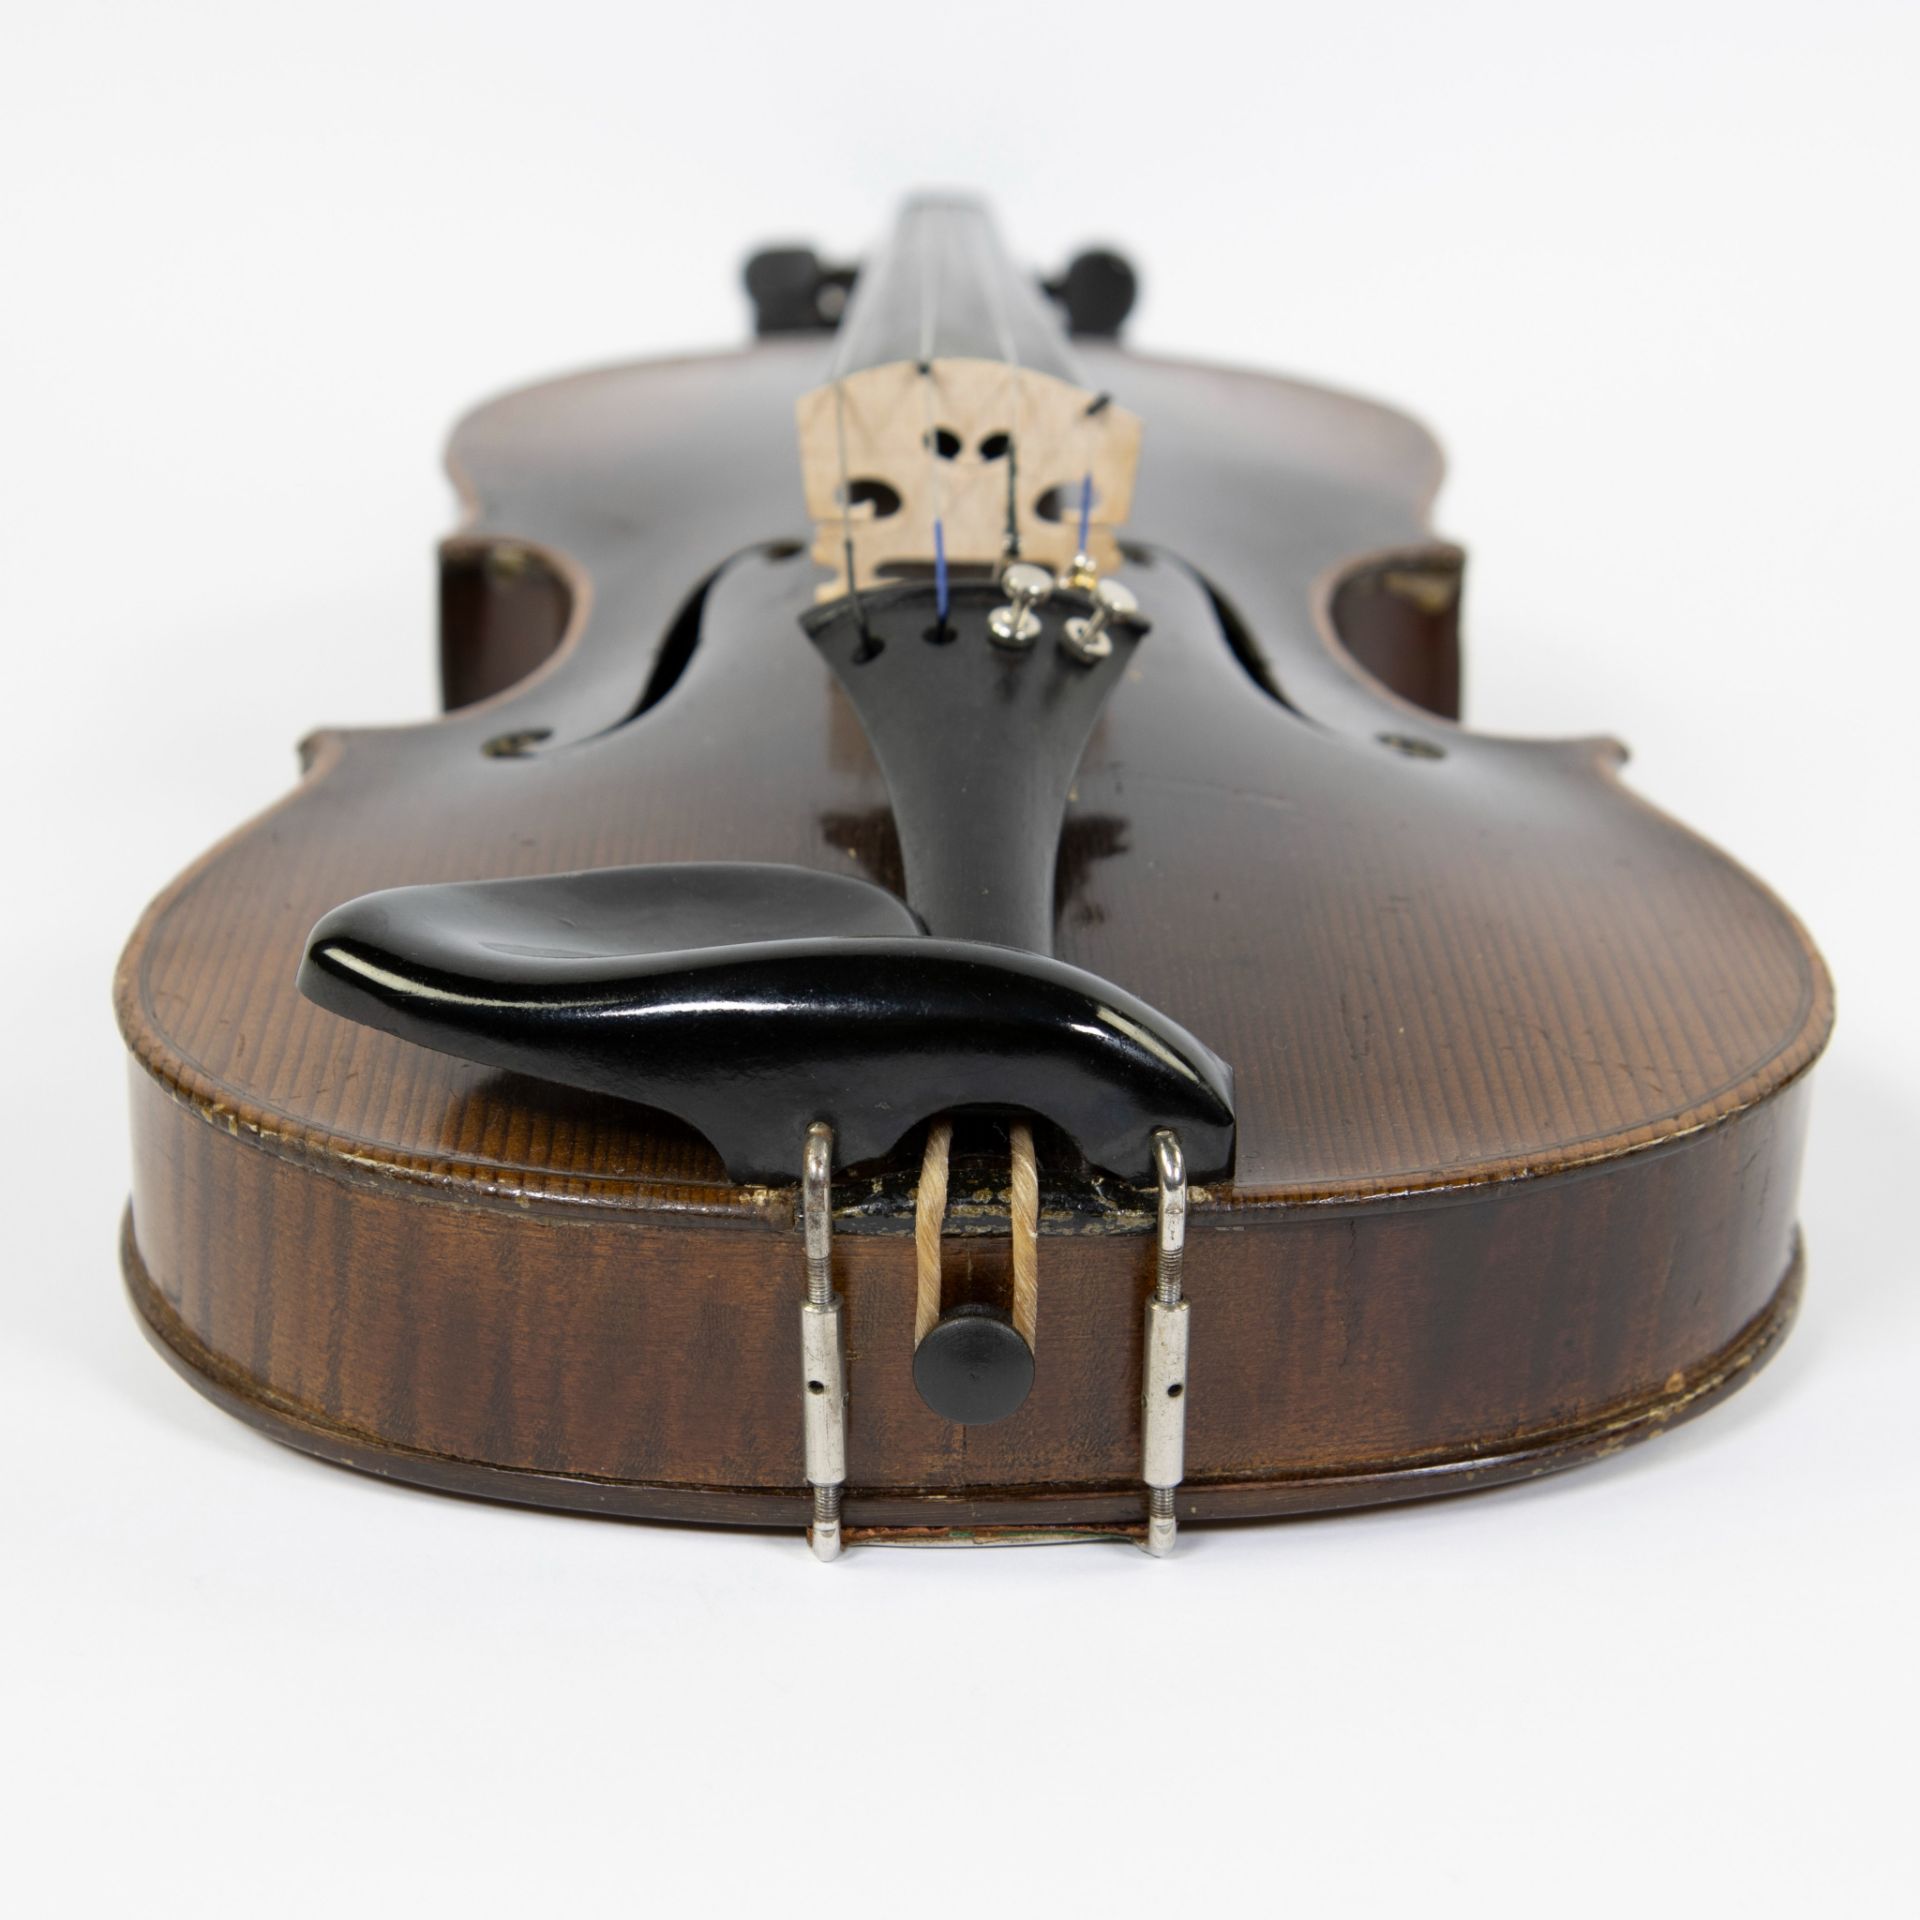 Violin label 'Jacob Schmidbauer, ano 1839', 360mm, playable, wooden case - Image 5 of 5